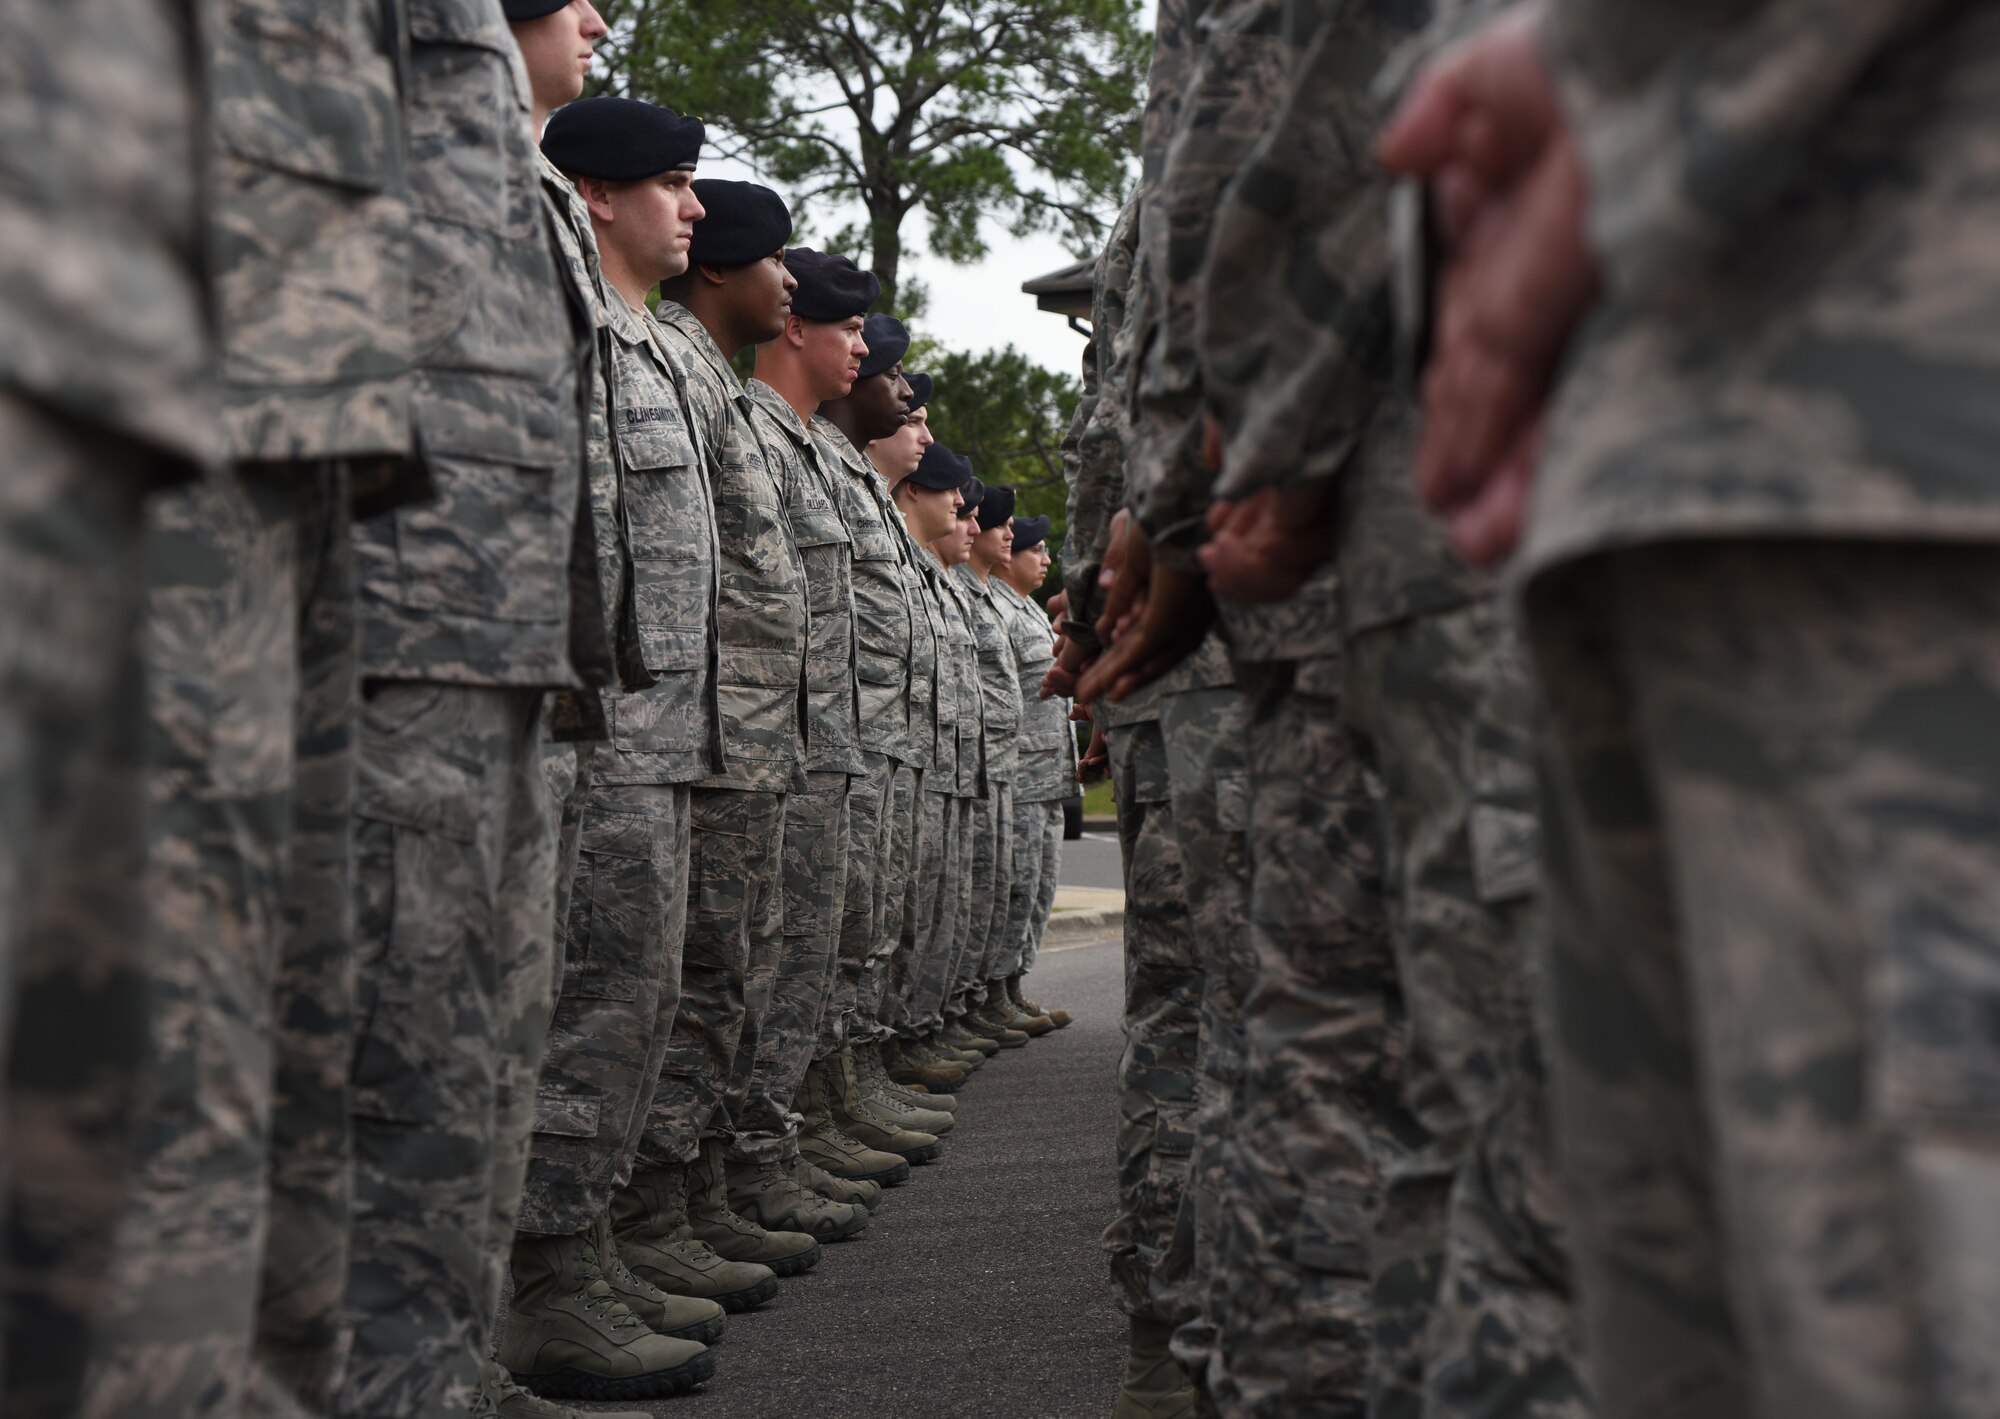 Members of the 81st Security Forces Squadron stand in formation during the 81st SFS retreat ceremony May 18, 2017, on Keesler Air Force Base, Miss. The event was held during National Police Week, which recognizes the service of law enforcement men and women who put their lives at risk every day. (U.S. Air Force photo by Kemberly Groue)